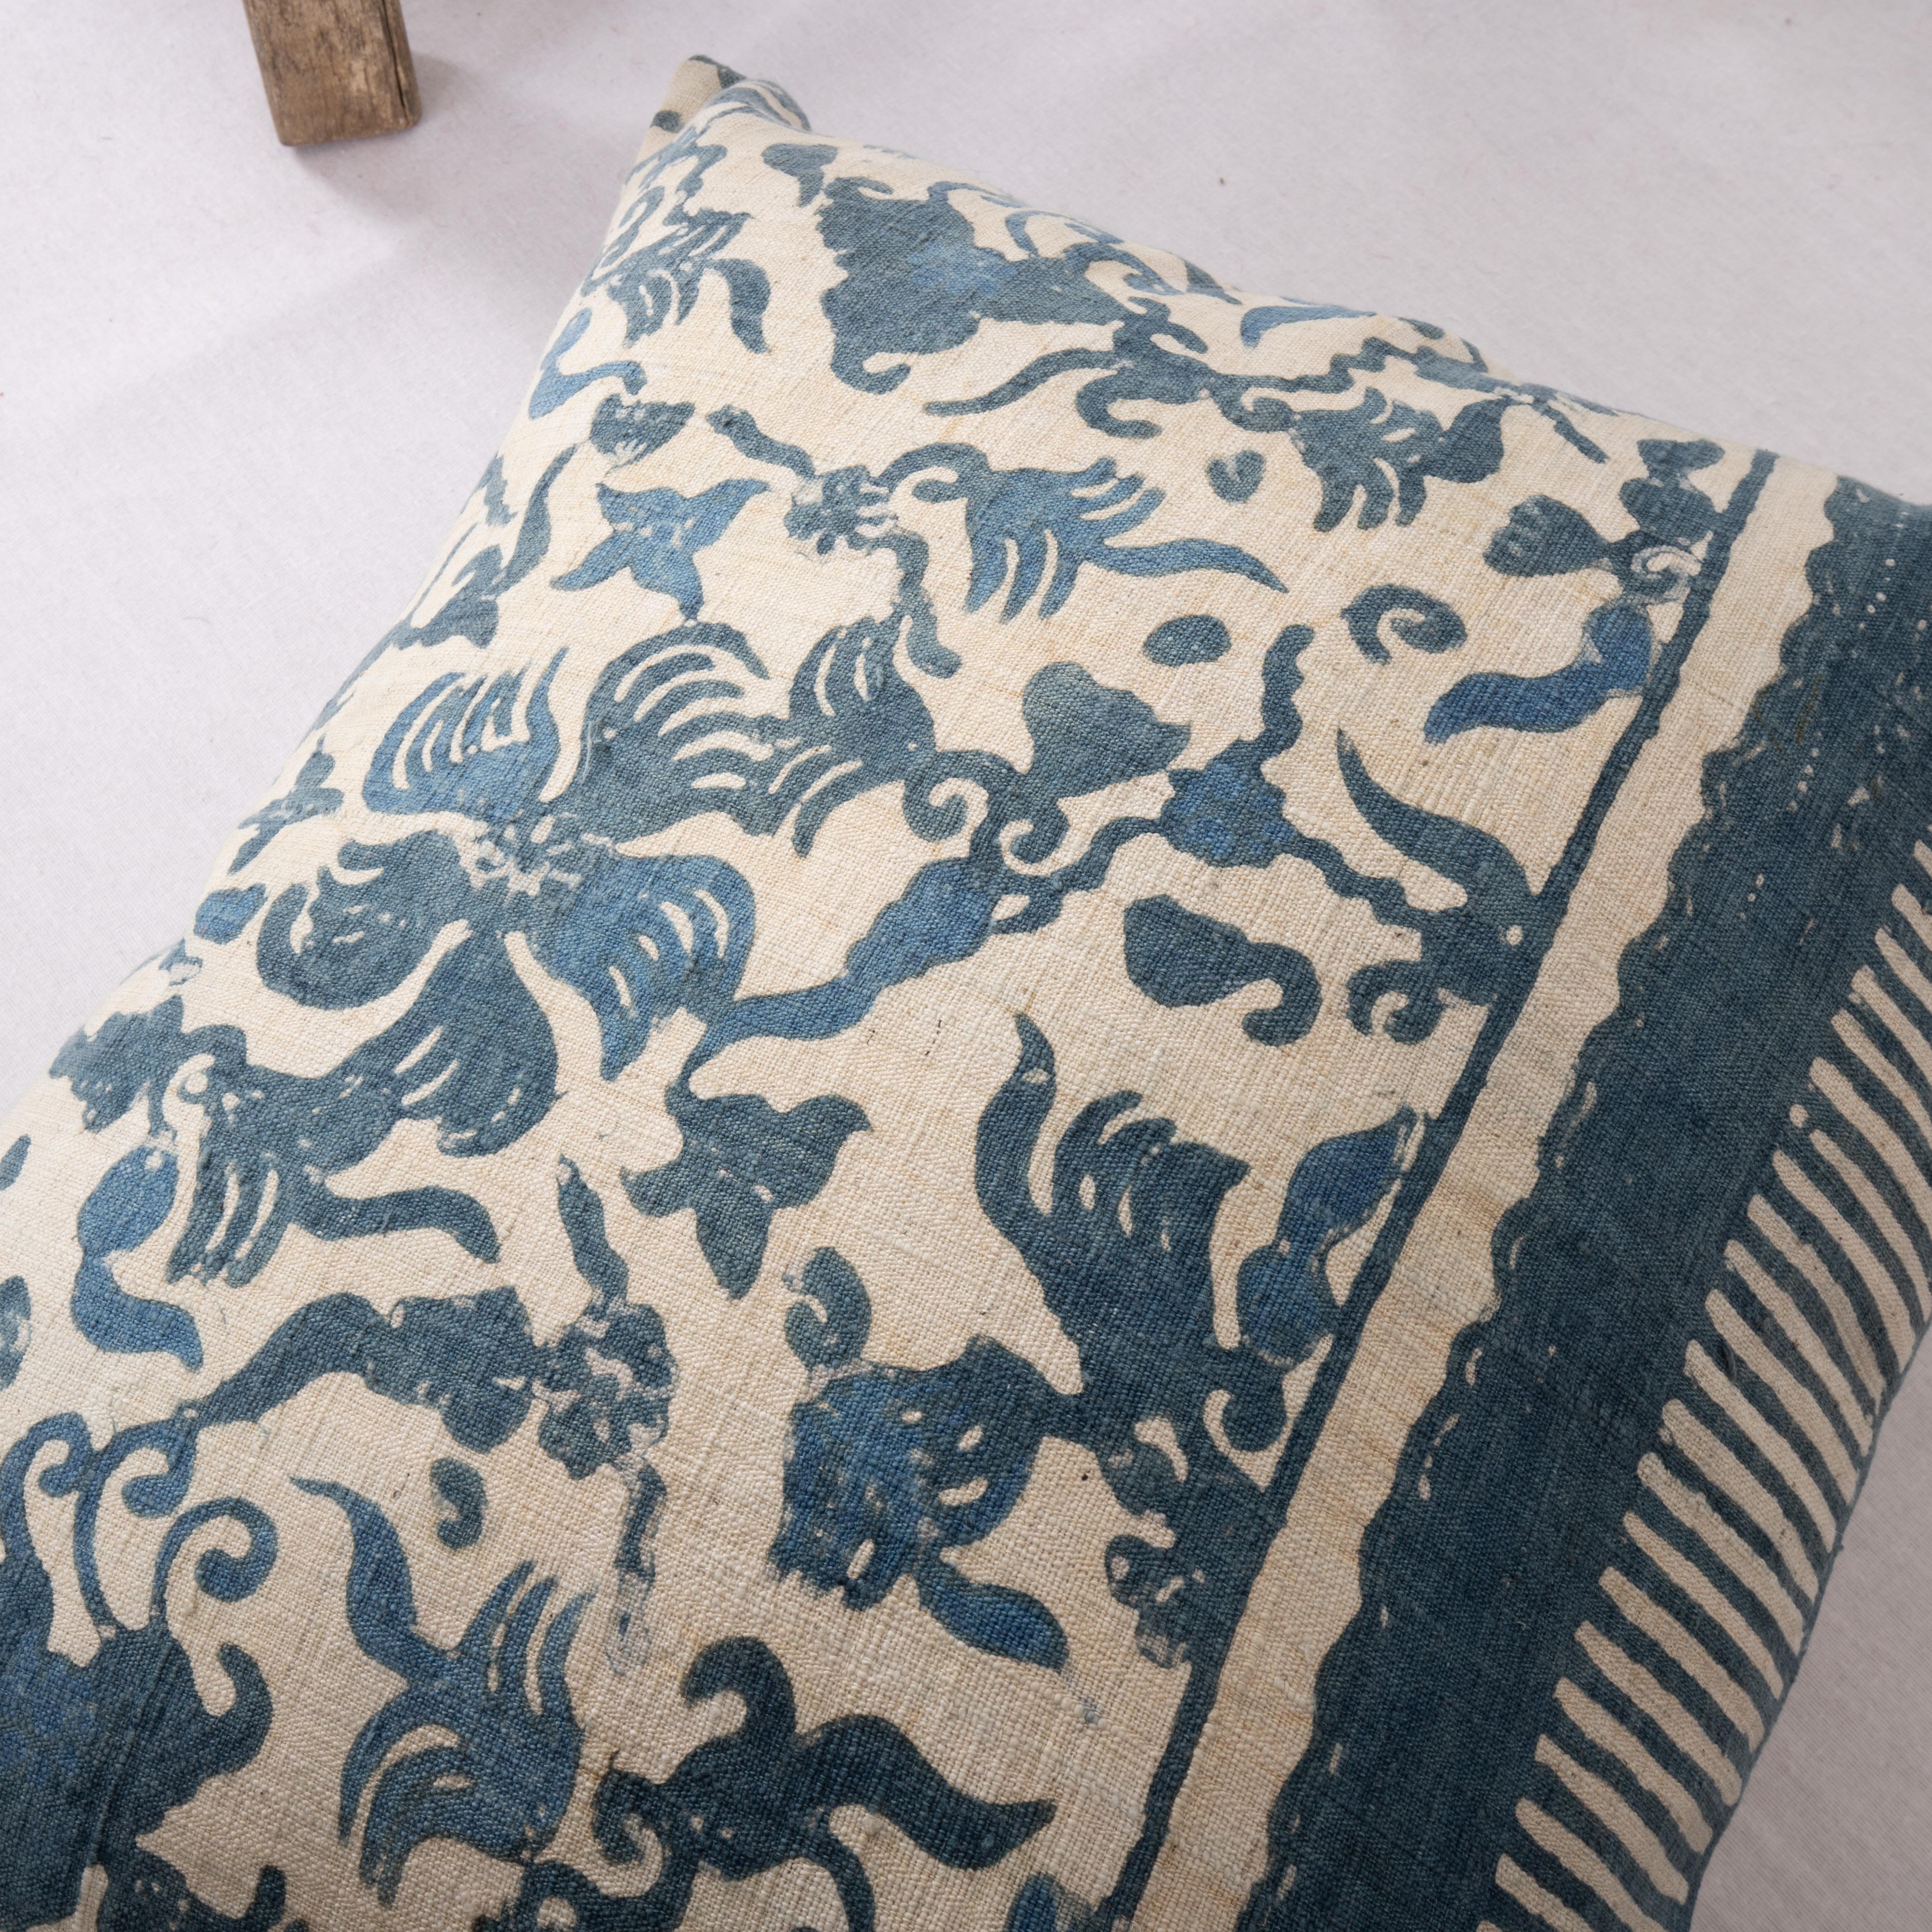 Vintage Cotton Batik Pillow Cover, 1970s/80s In Good Condition For Sale In Istanbul, TR